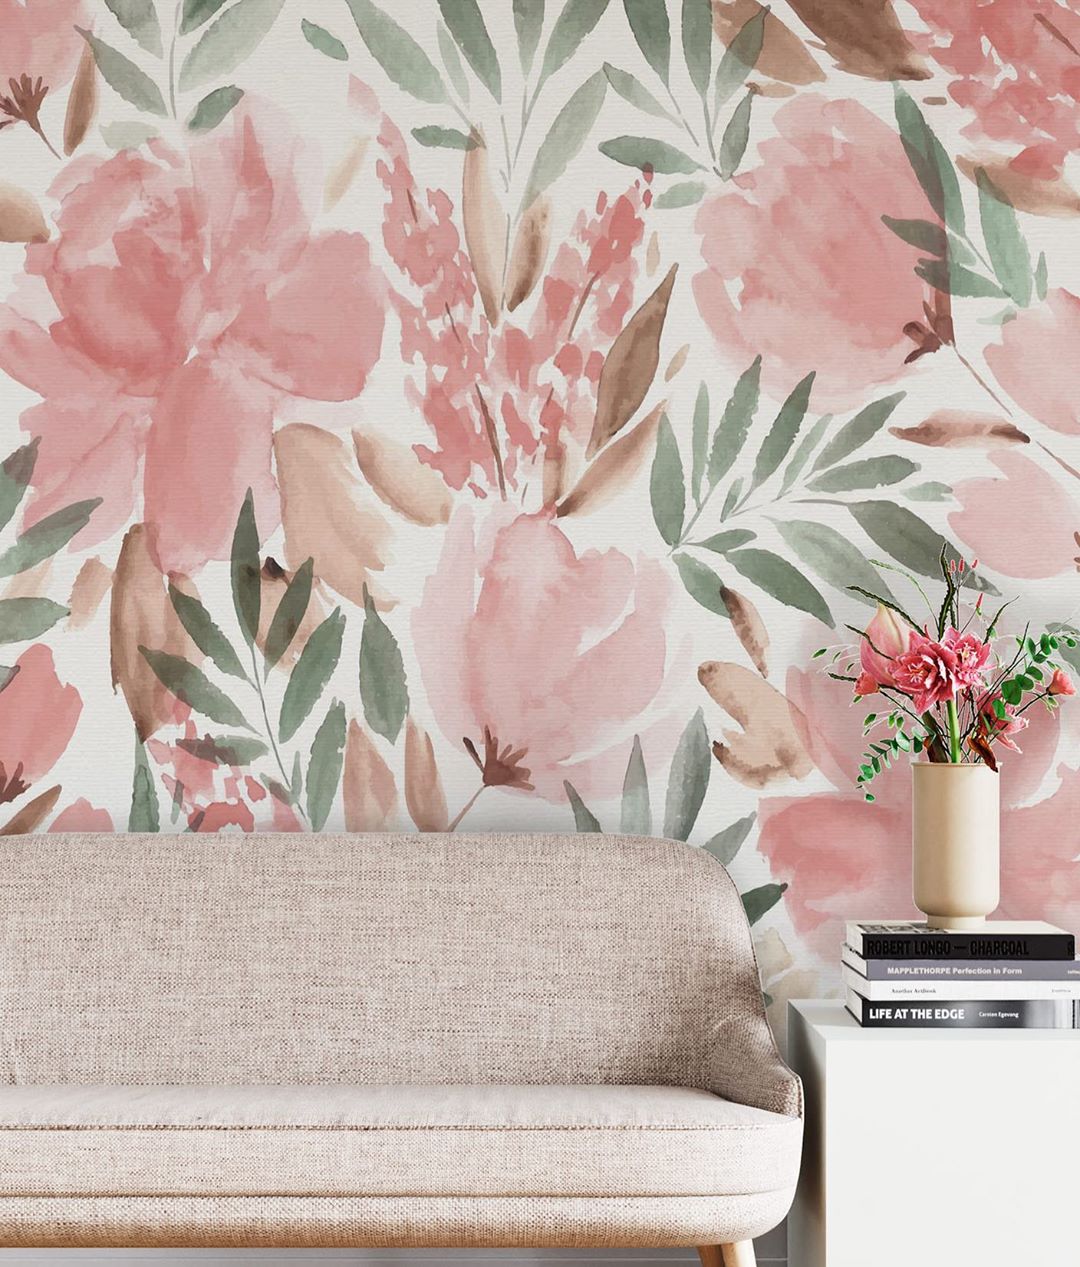 Seven Important Reasons Why Your Wall Decoration Matters